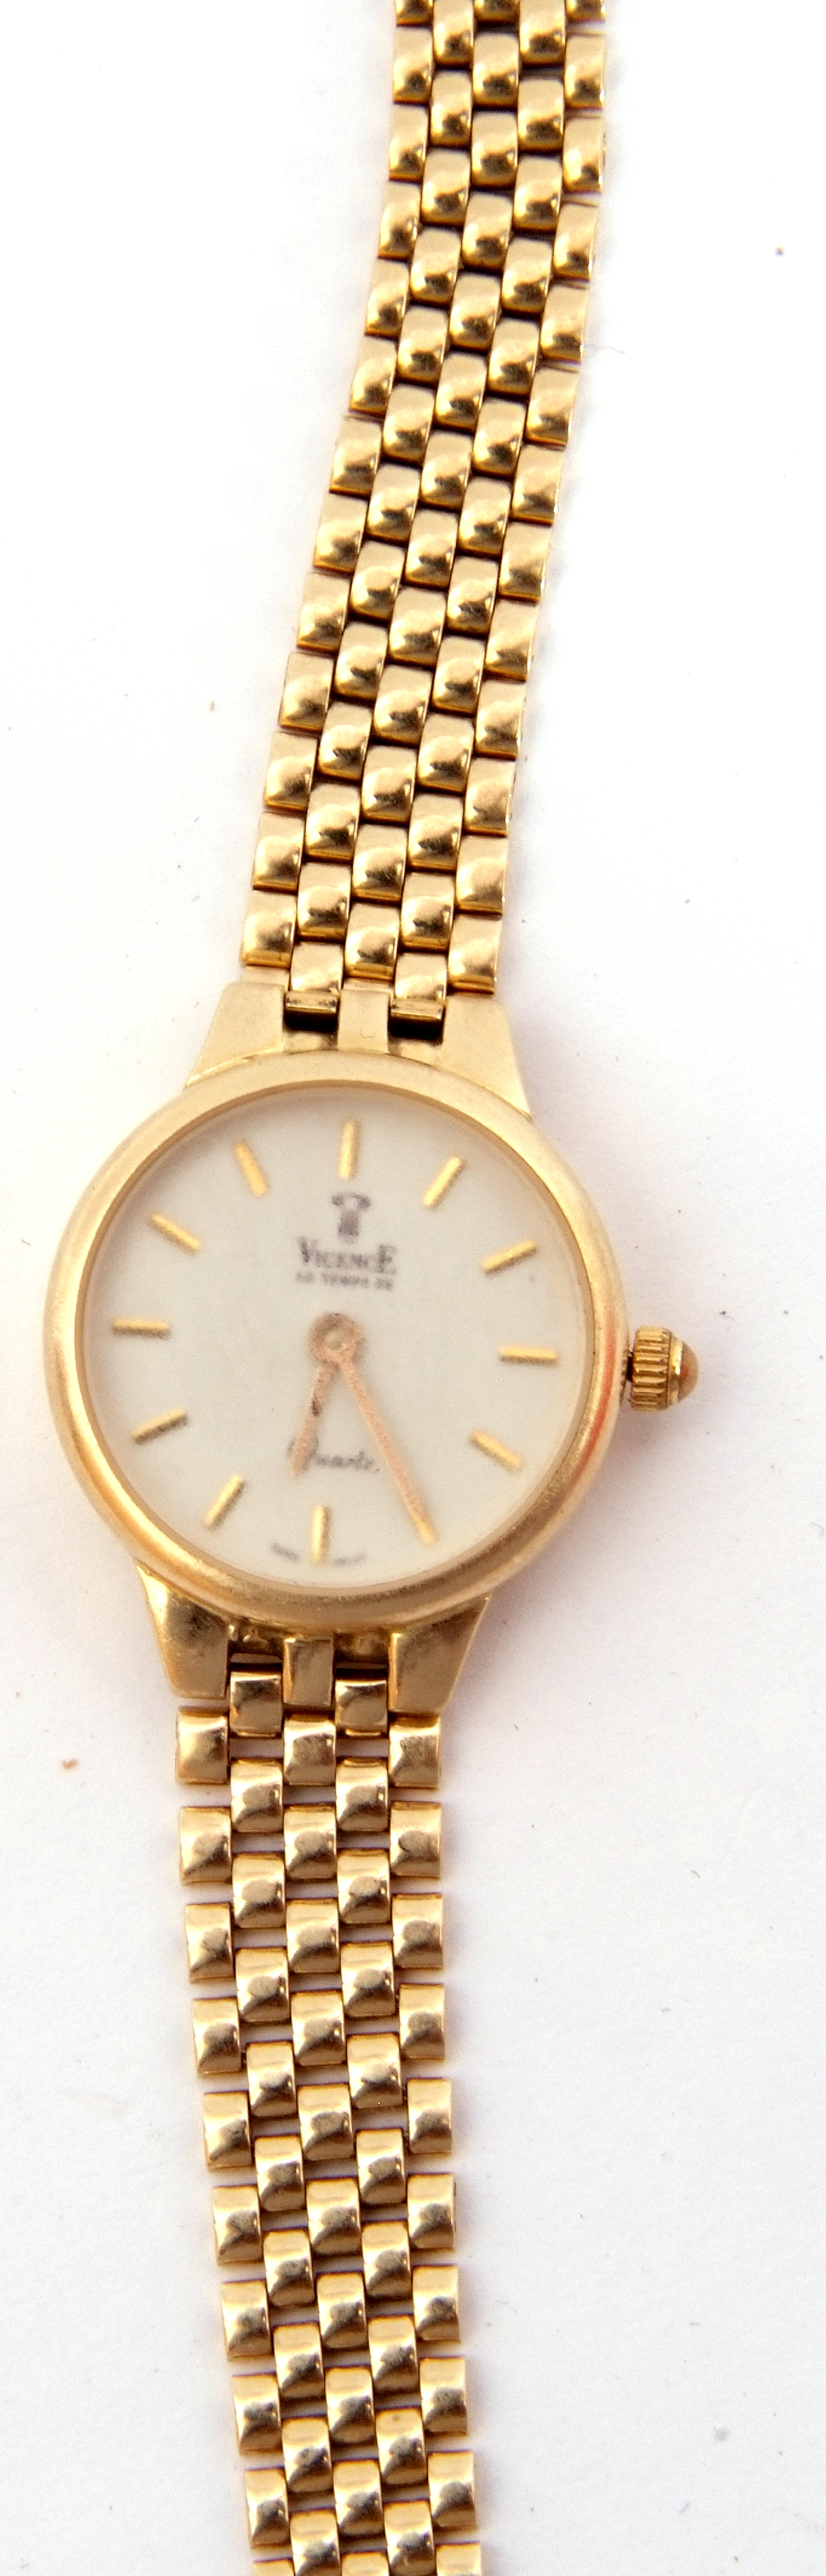 Ladies 14K stamped Vicence quartz wrist watch, a white coloured dial, 18mm diam, on a mini-link - Image 2 of 6